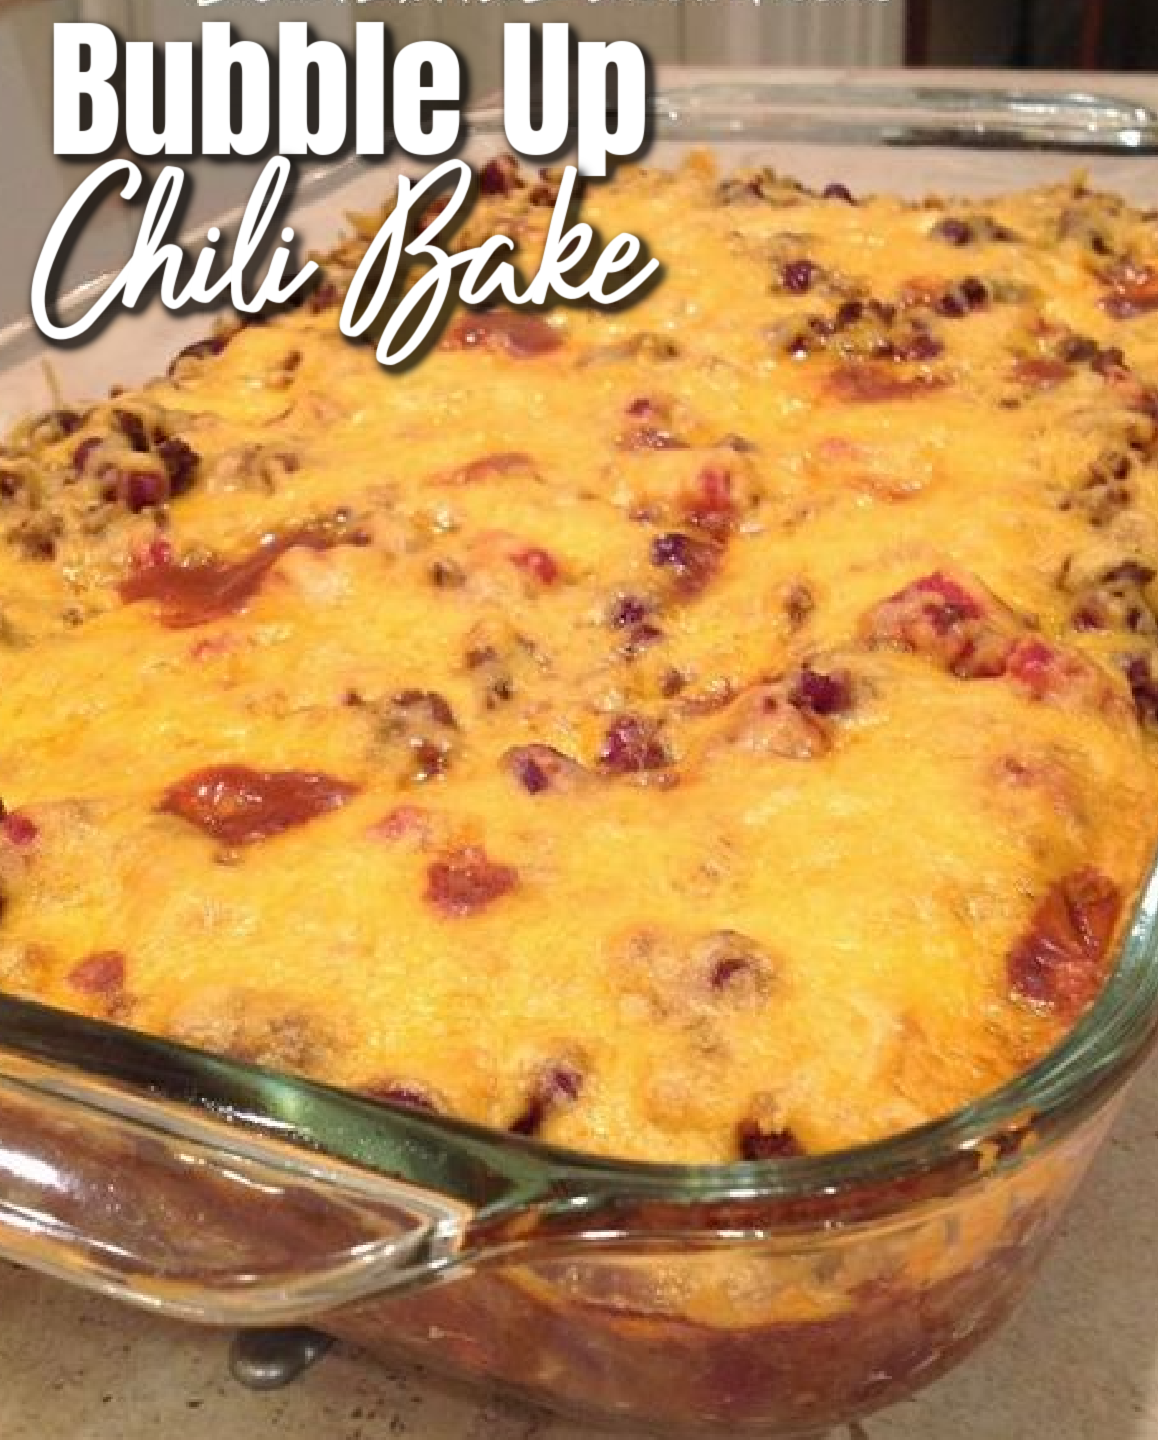 This image shows Bubble Up Chili Bake after baking in a clear glass baking dish.